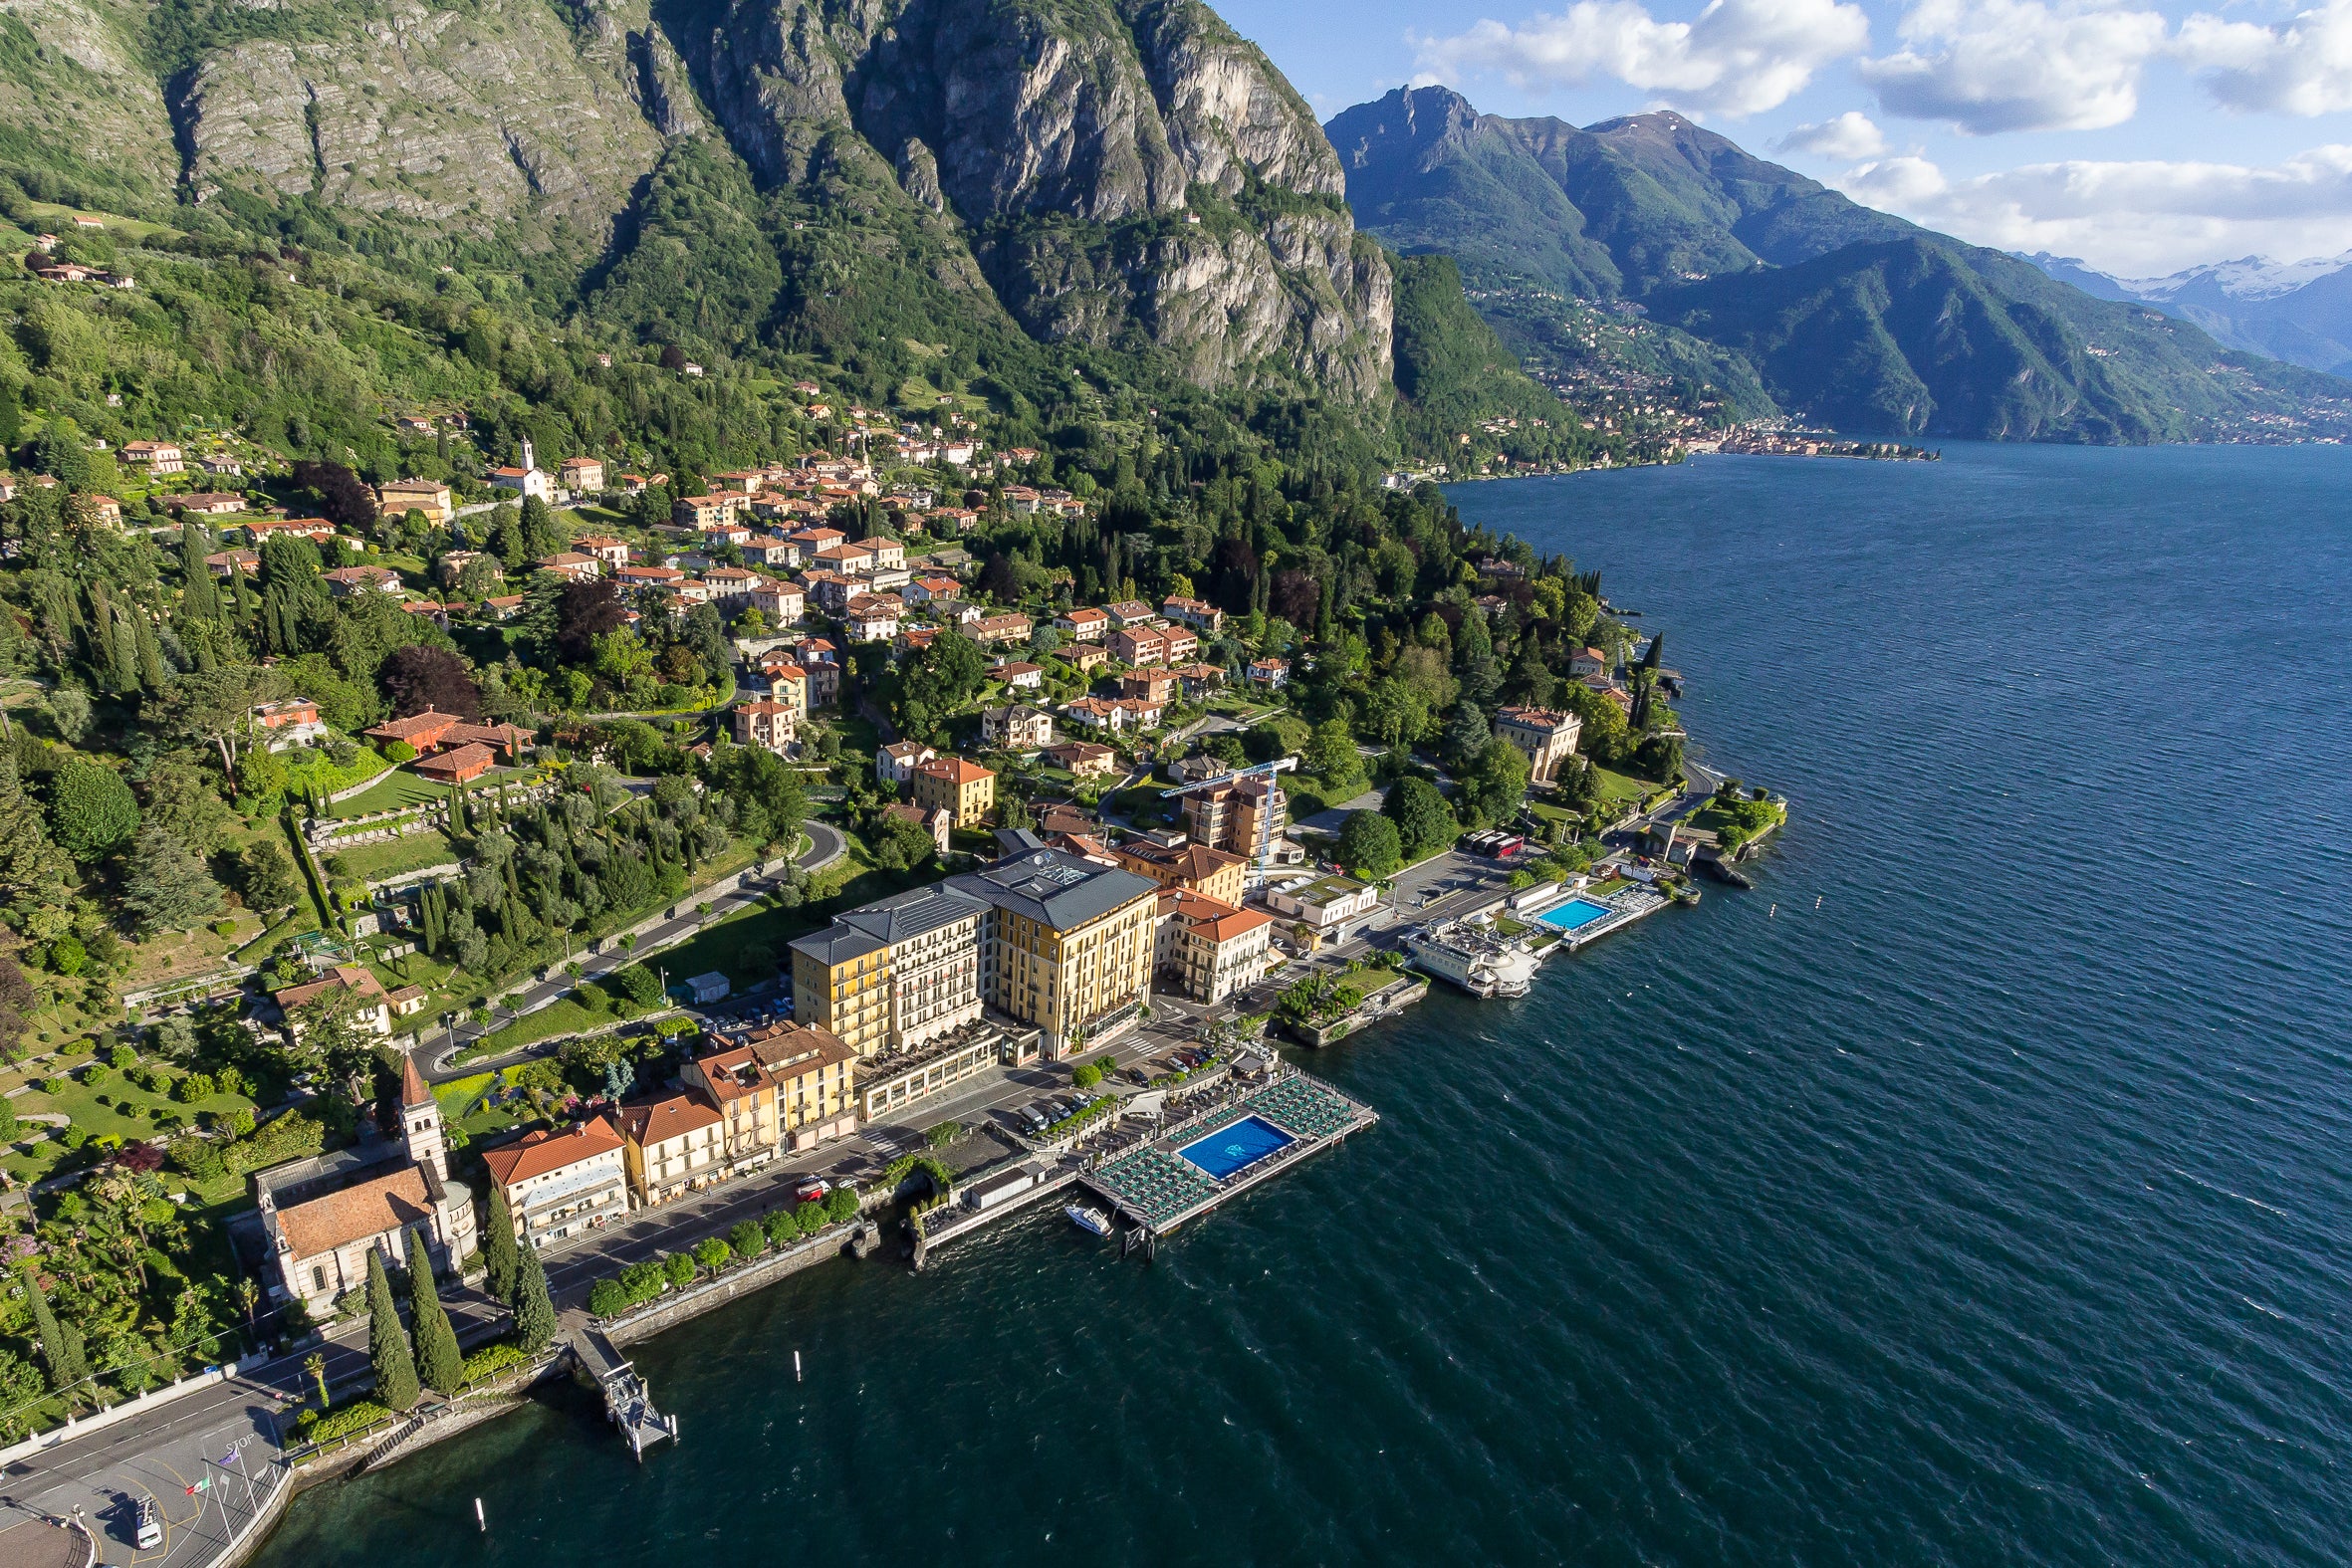 Marriott to introduce EDITION brand to Lake Como, Italy